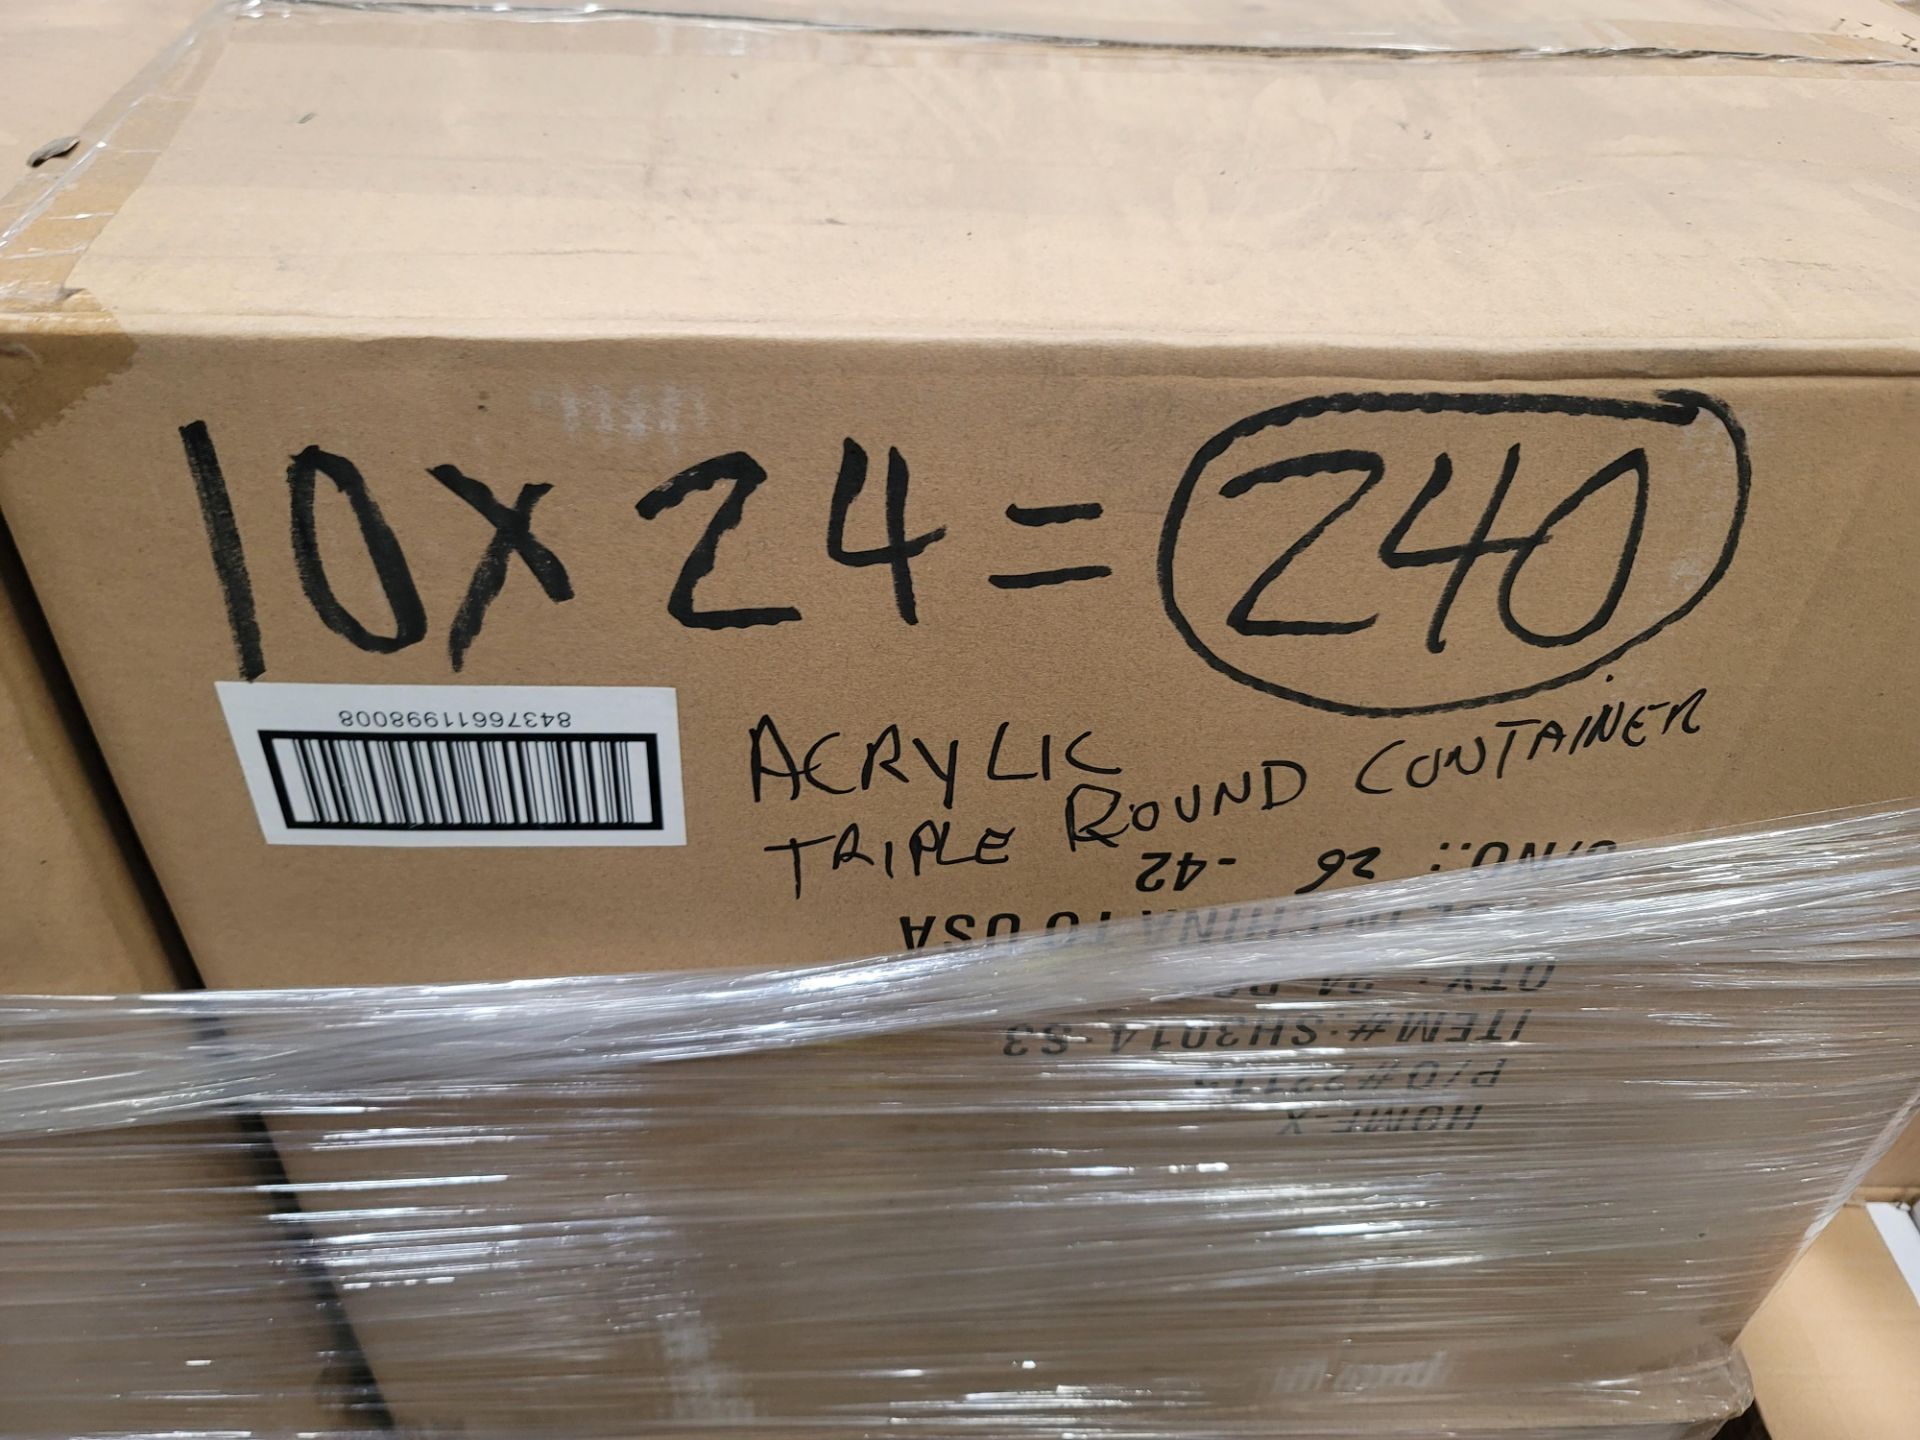 LOT - PALLET OF (240) ACRYLIC TRIPLE ROUND CONTAINERS, (10 CASES/24 PER CASE) - Image 2 of 4